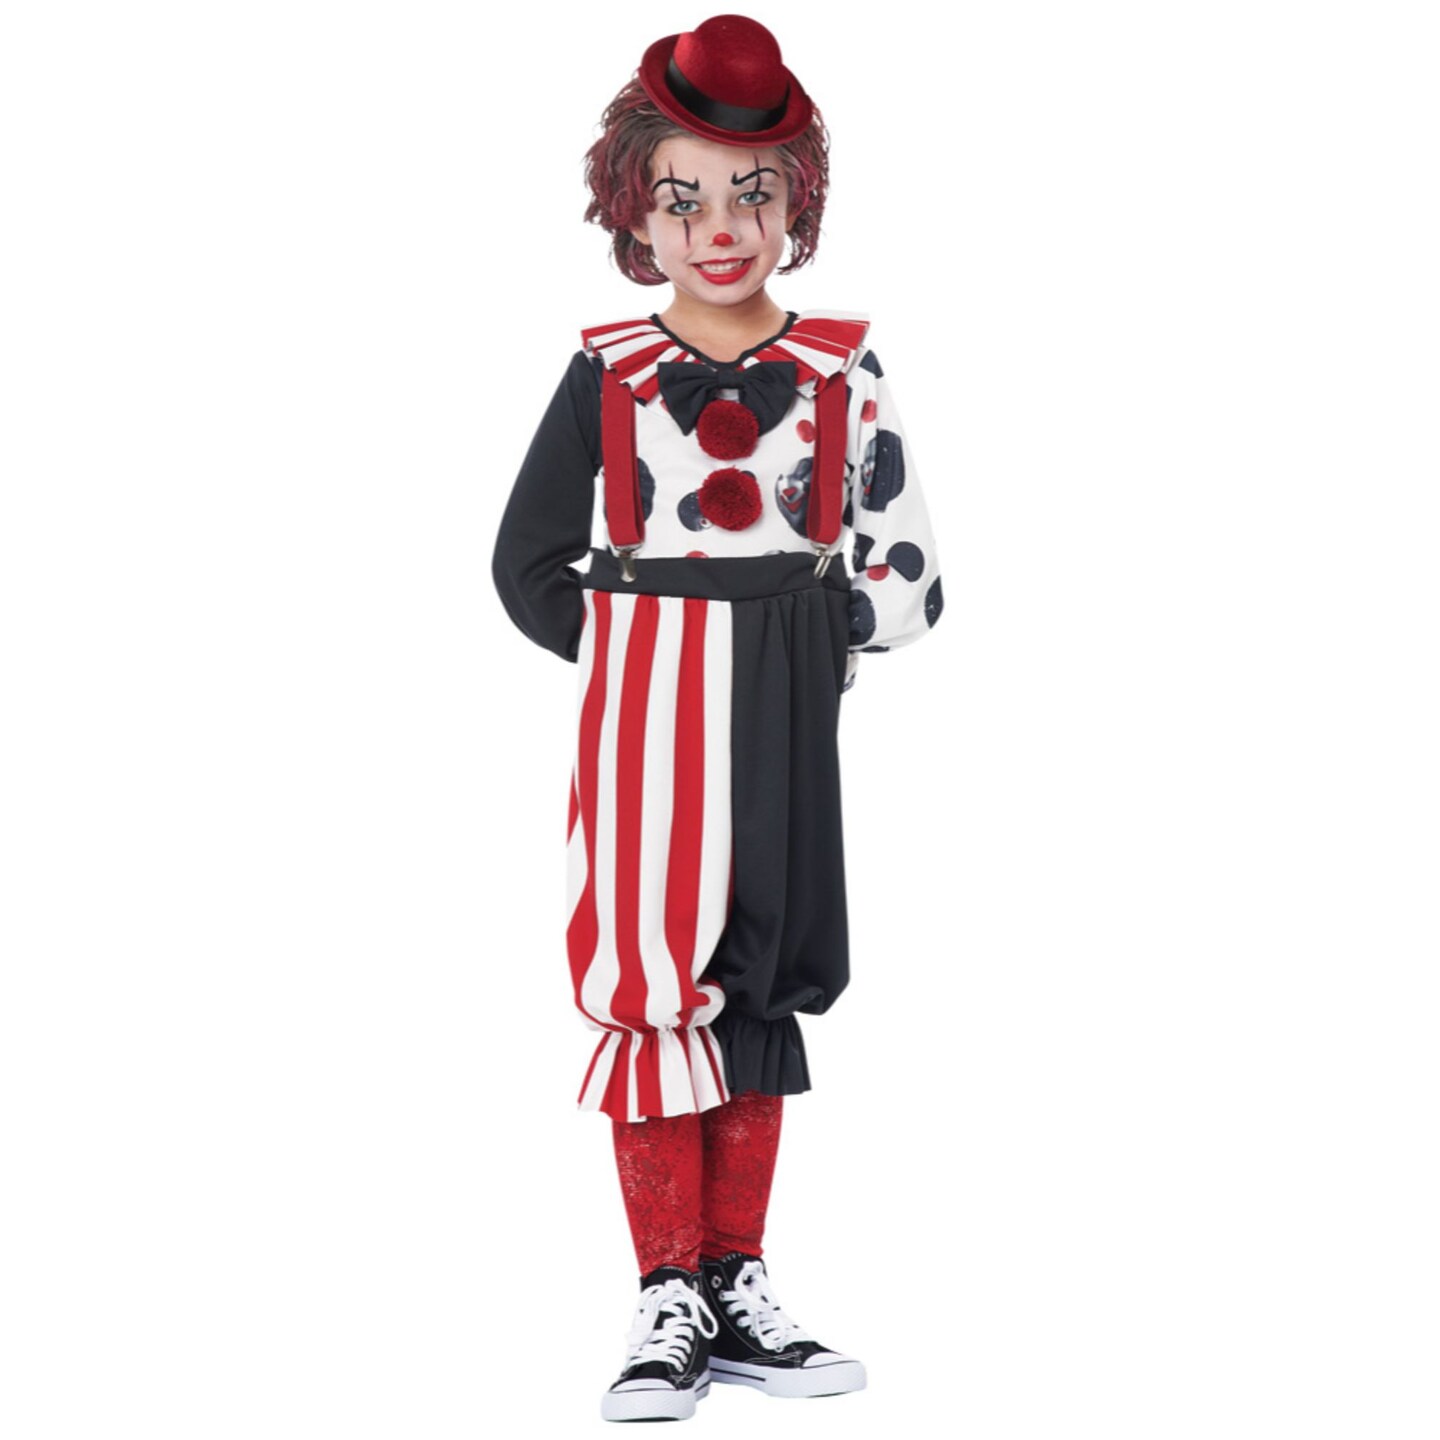 The Costume Center Red and Black Kreepy Klown Toddler Halloween Costume - Large